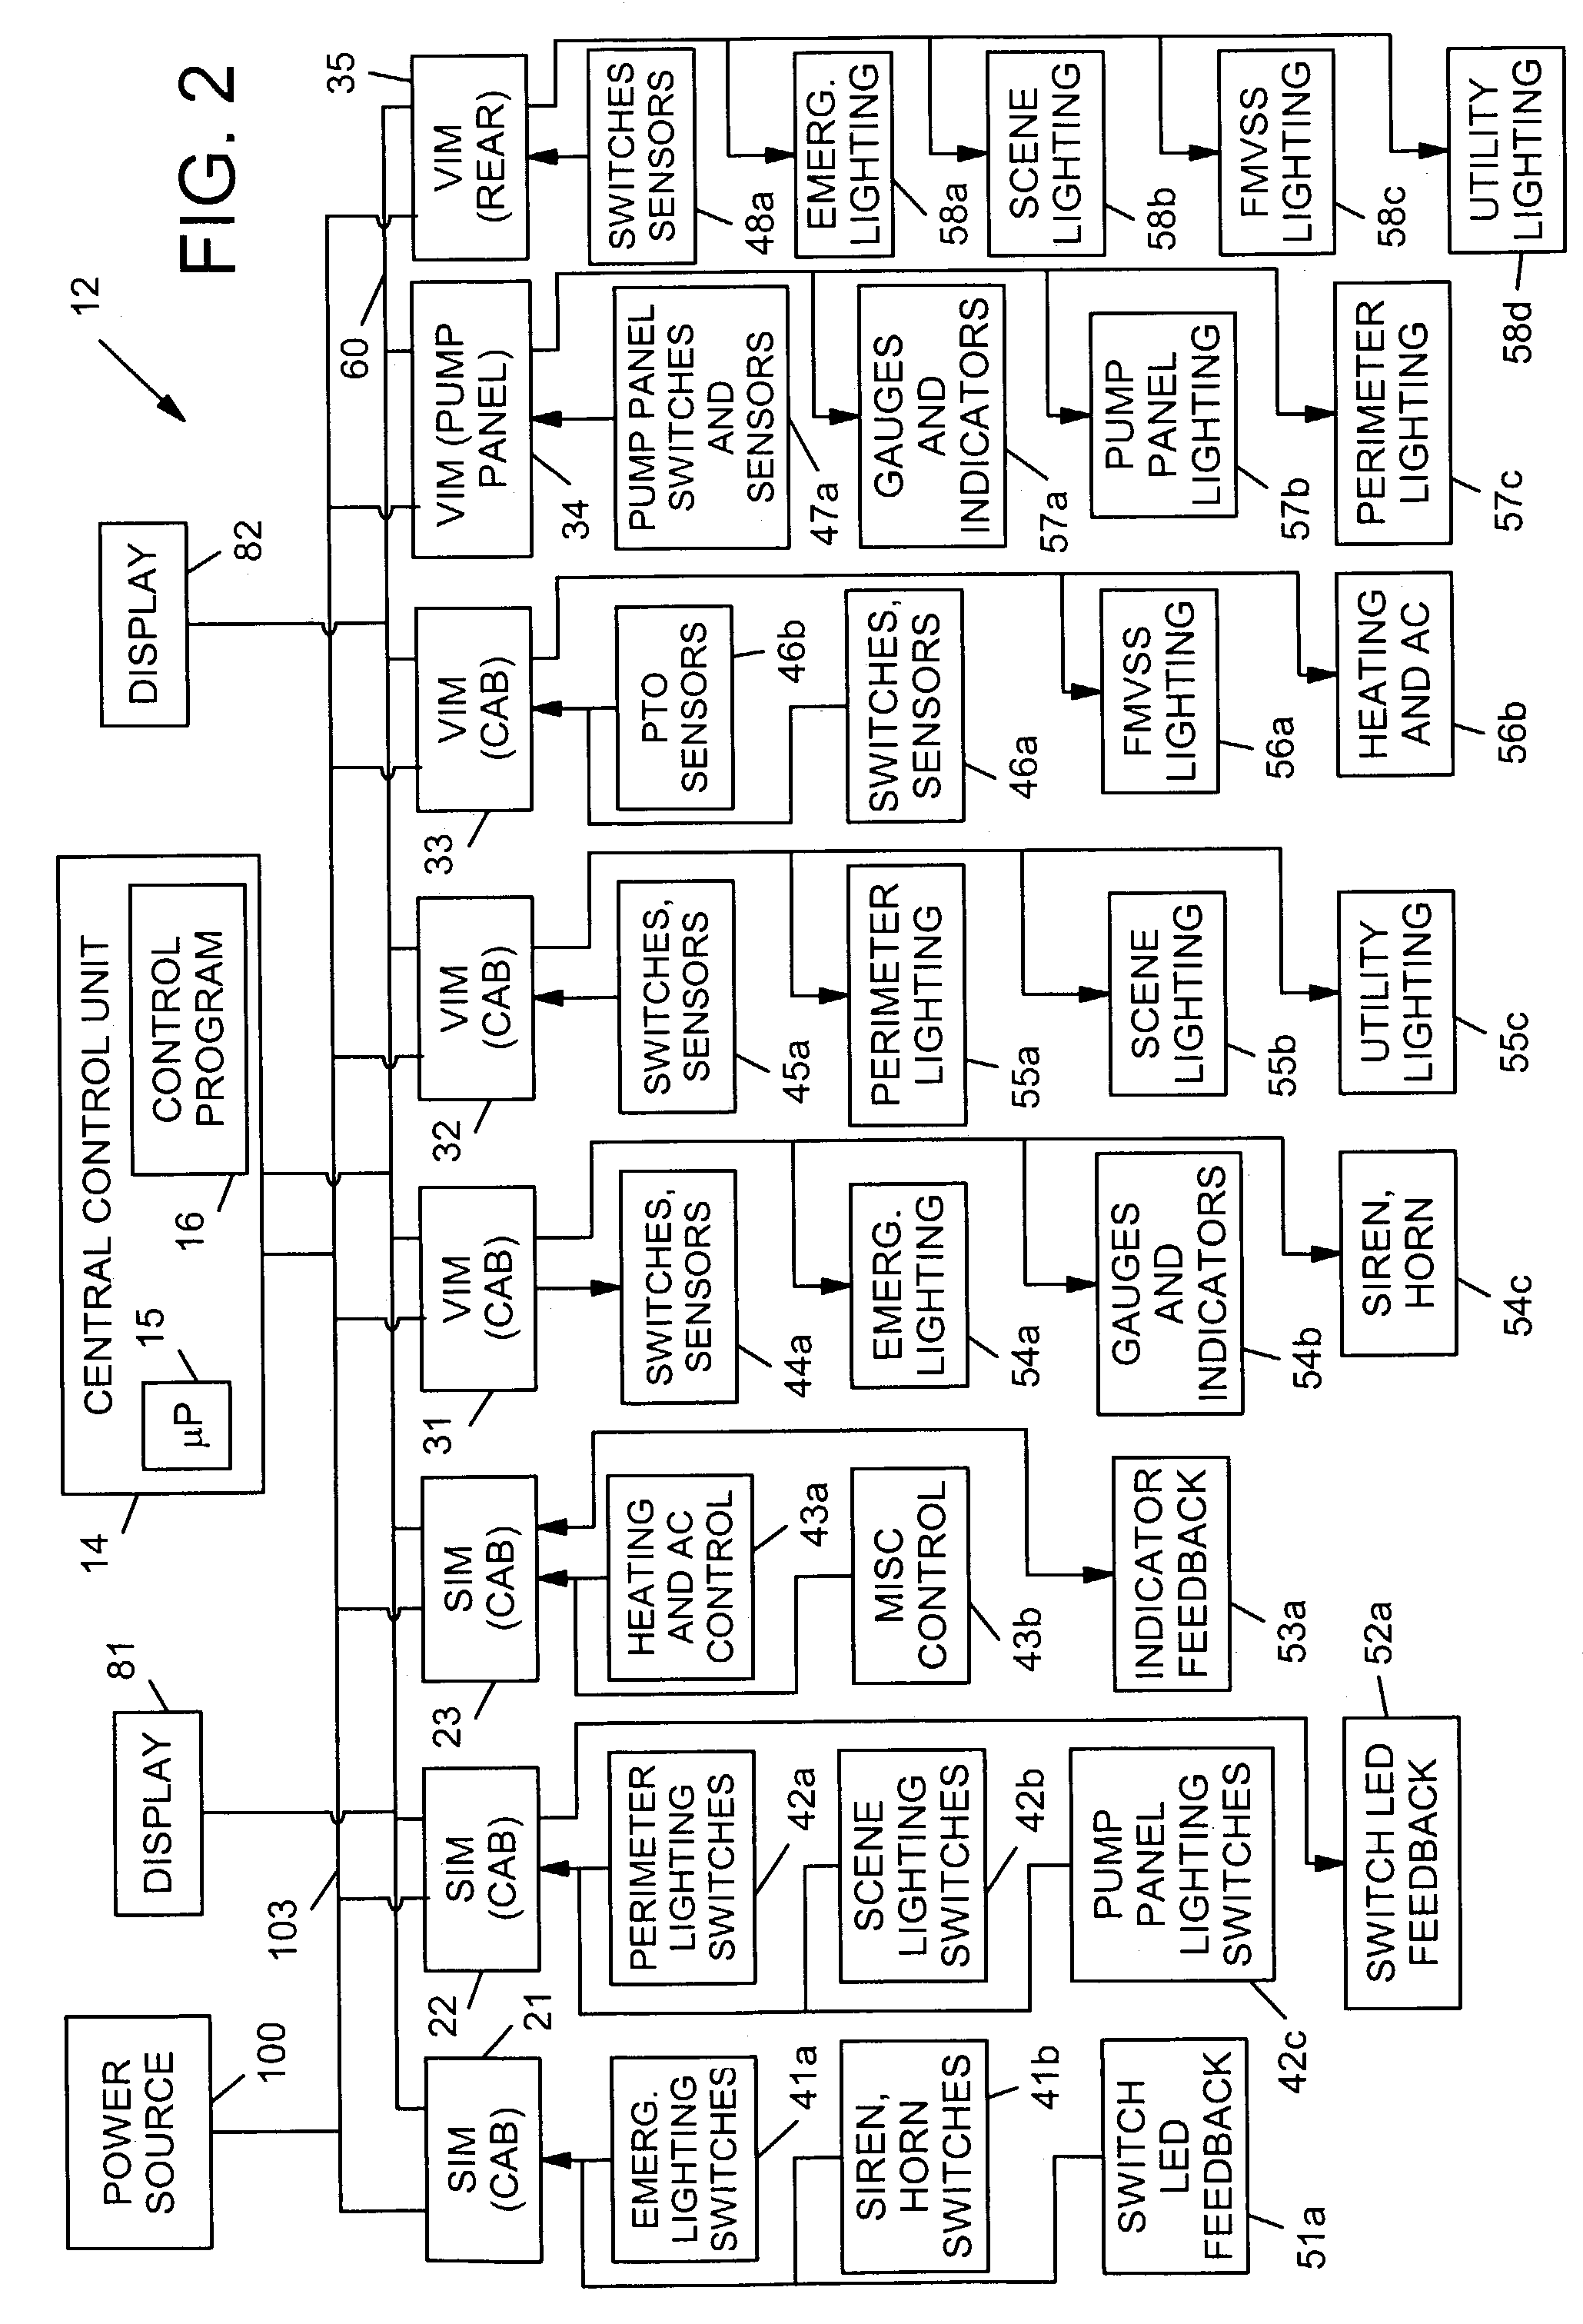 Turret deployment system and method for a fire fighting vehicle